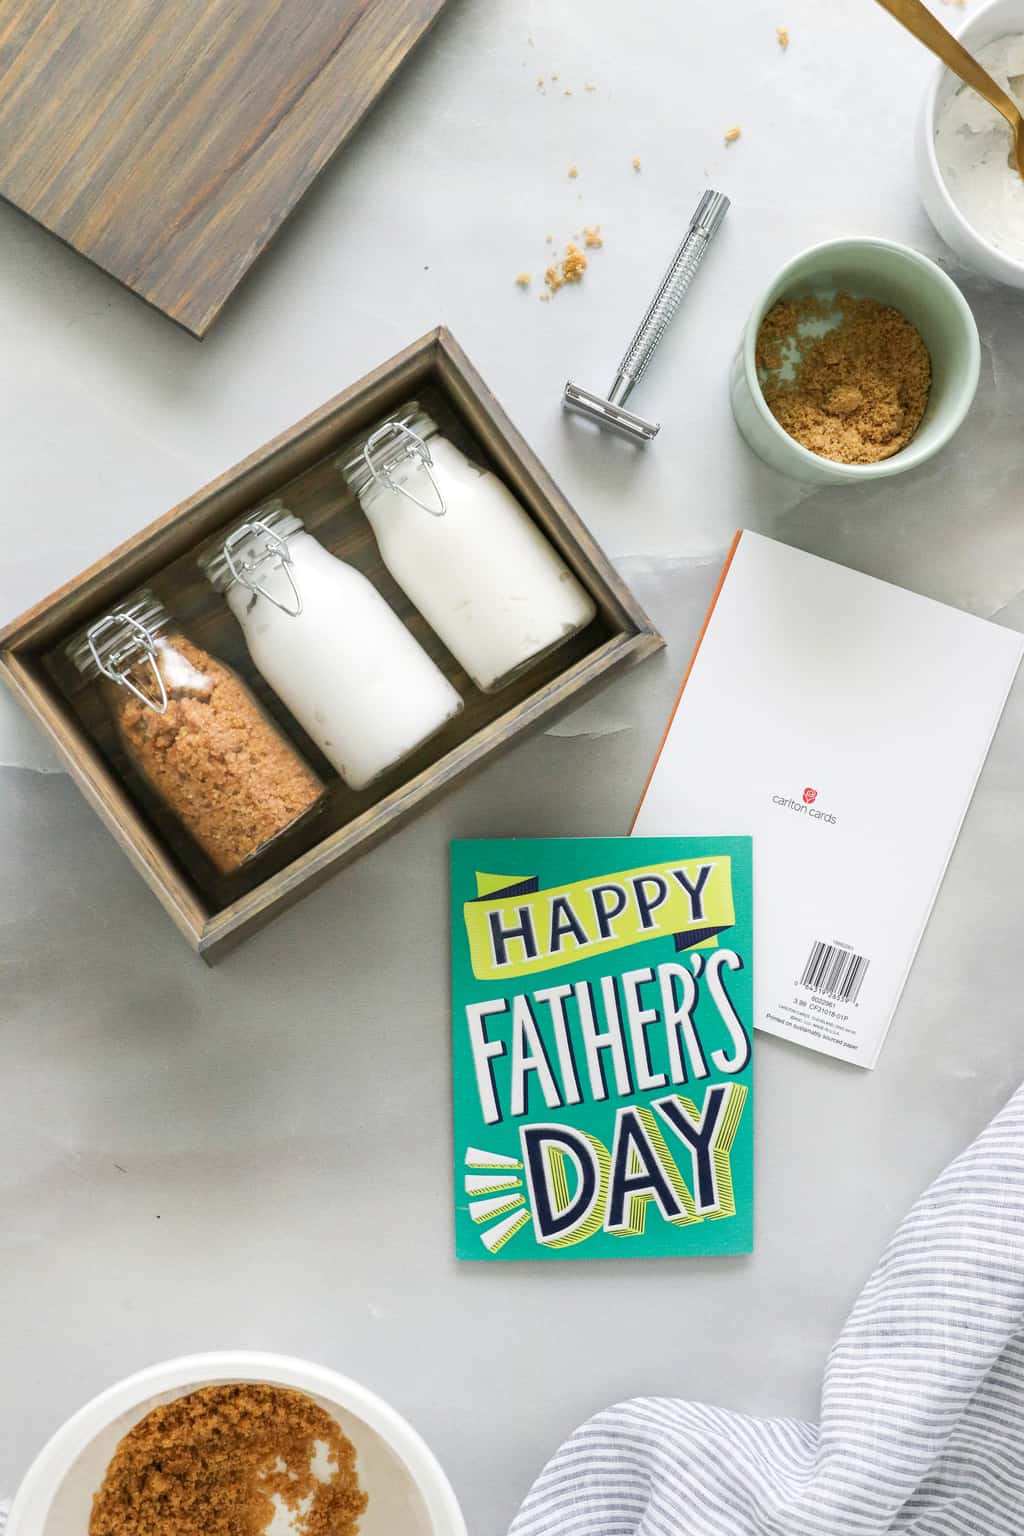 DIY Shaving Kit for Father's Day